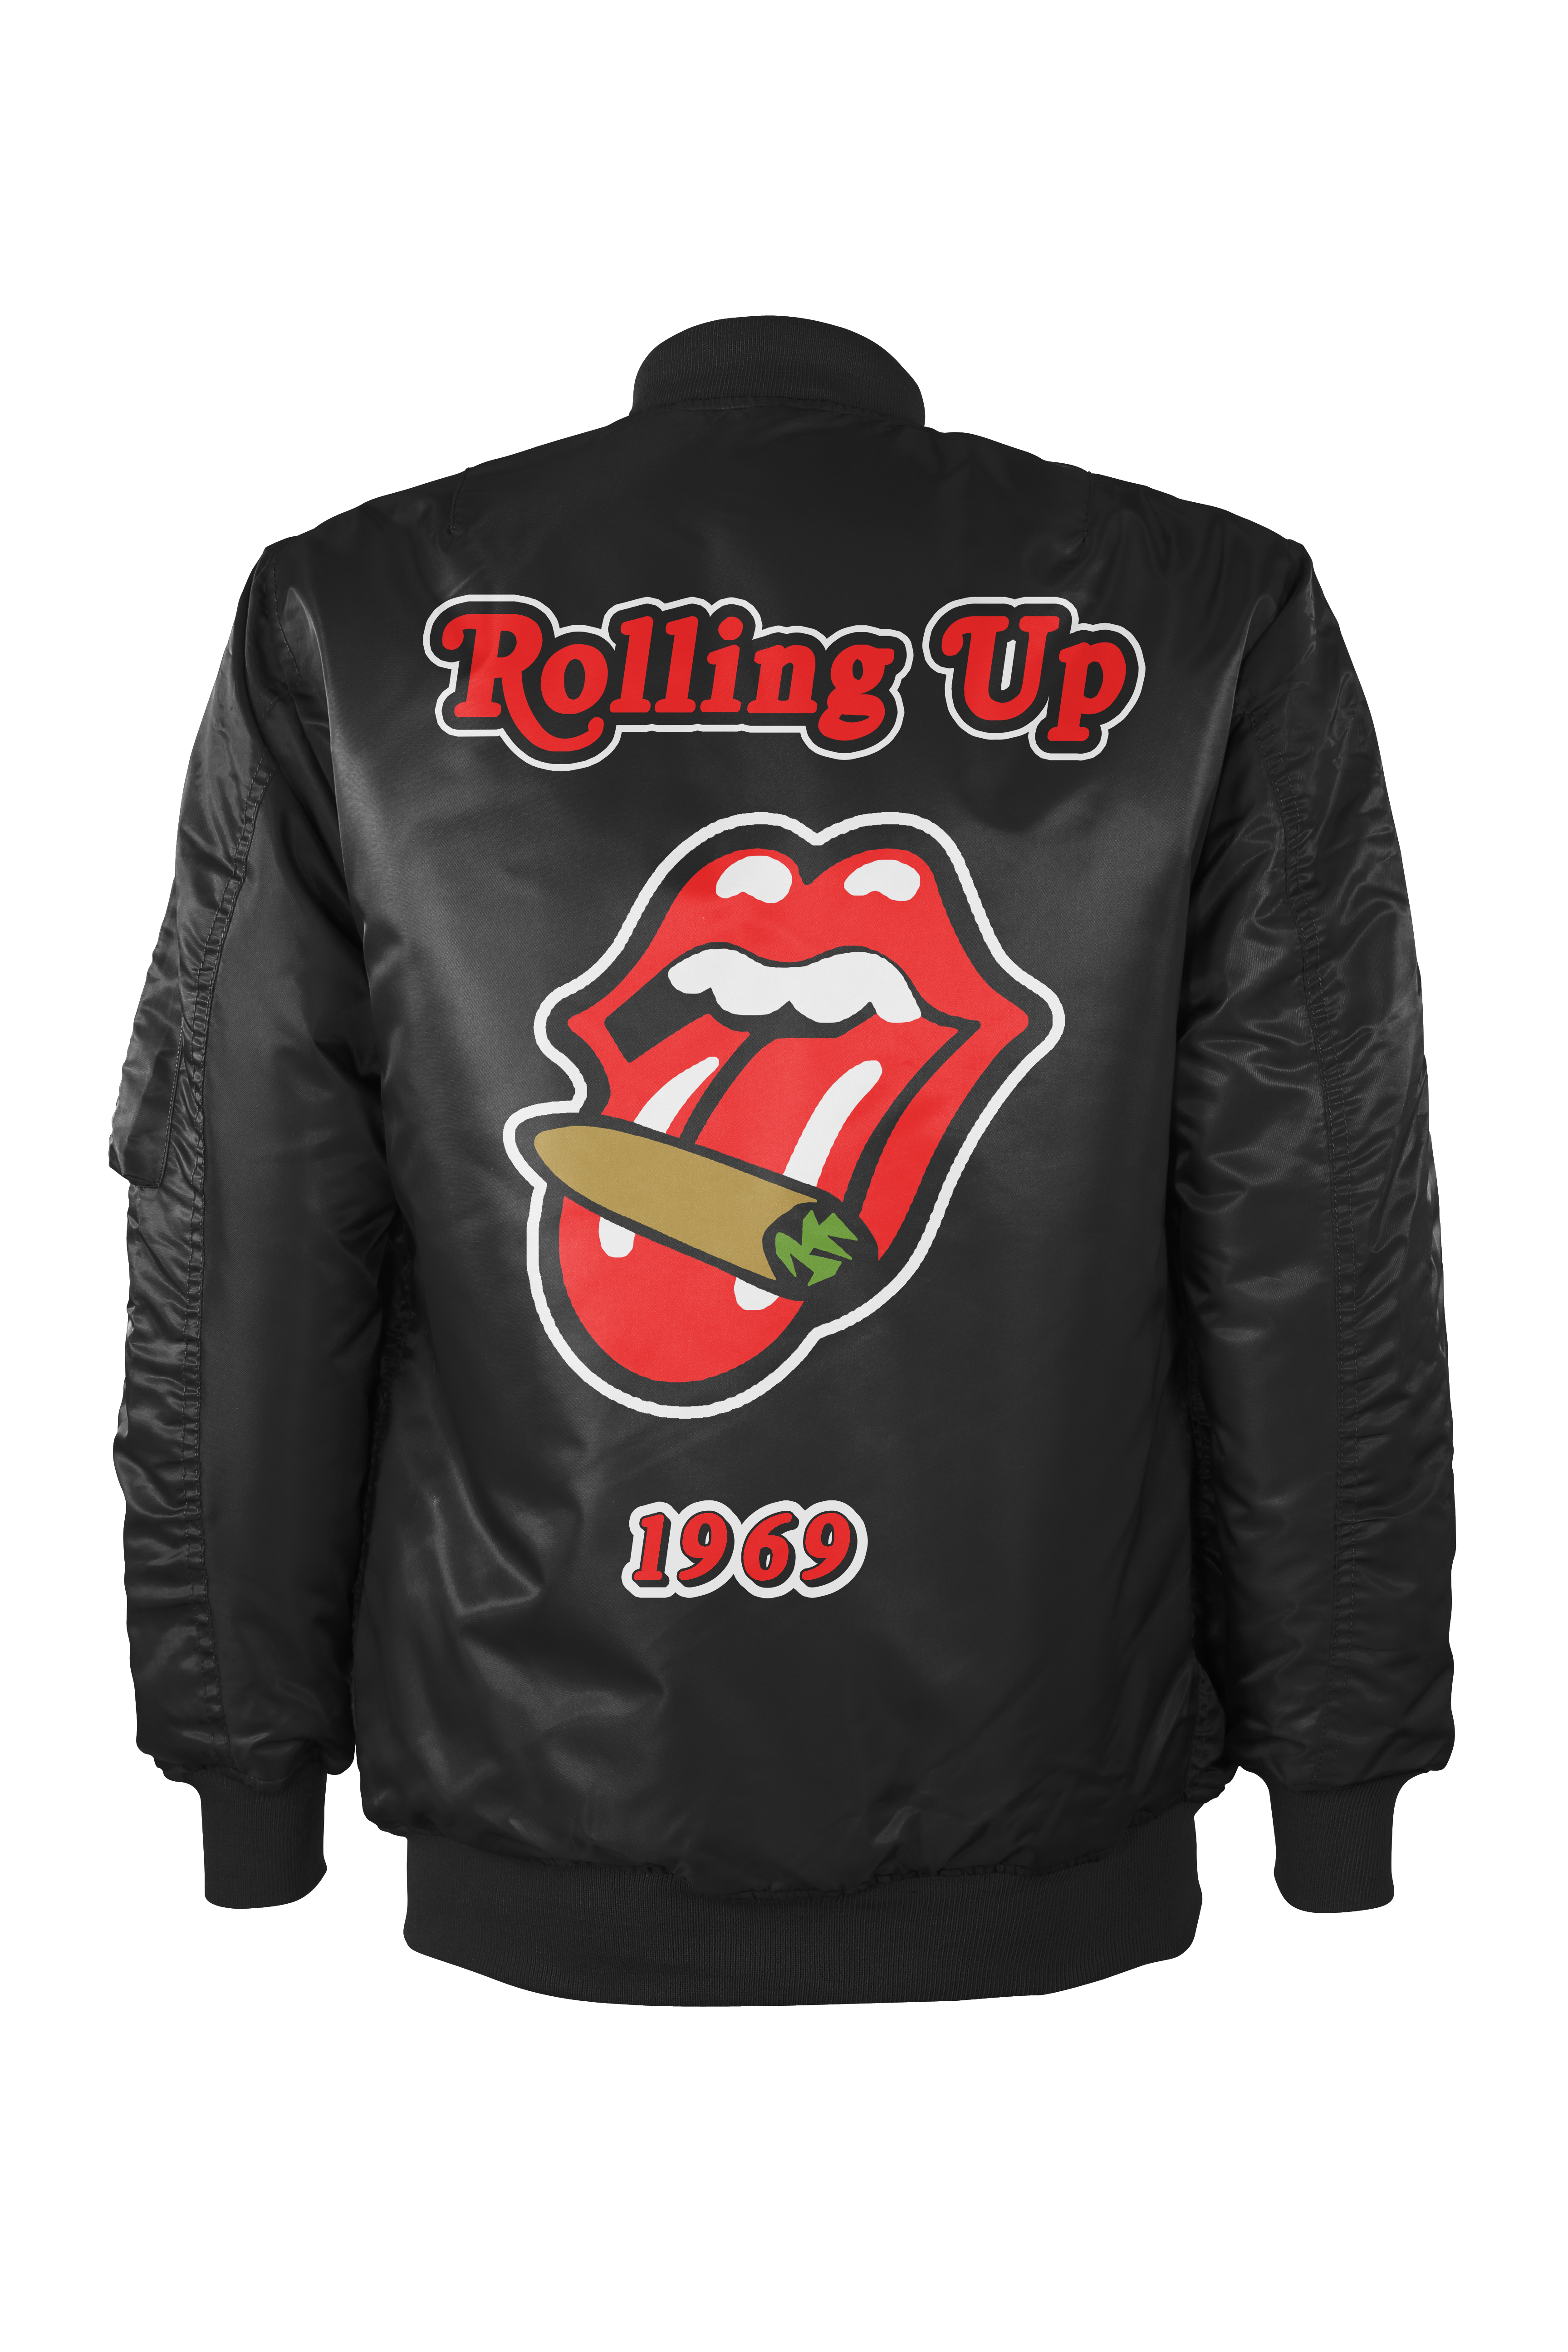 shirts clipart red jacket